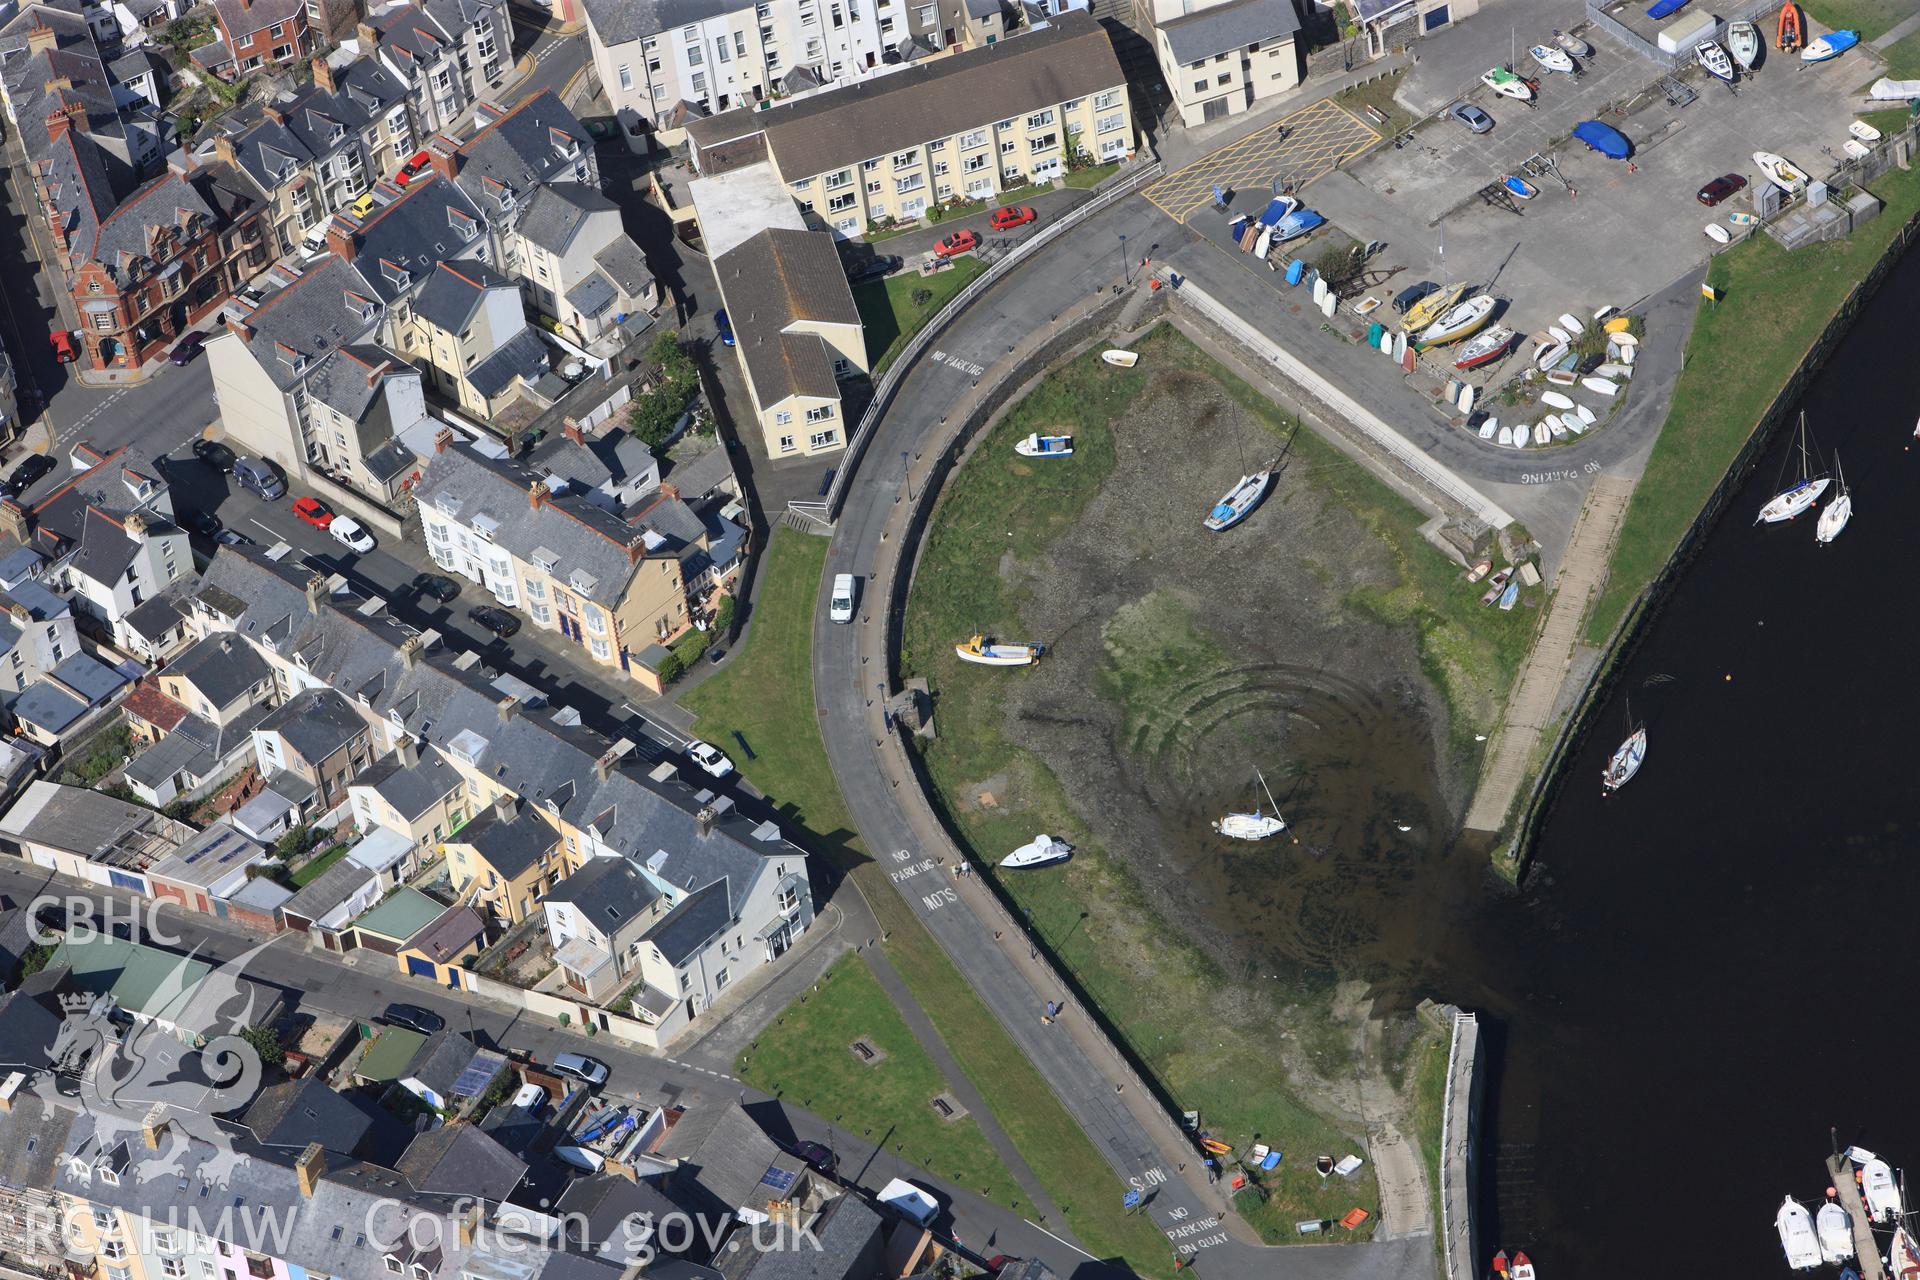 RCAHMW colour oblique photograph of Aberystwyth harbour. Taken by Toby Driver and Oliver Davies on 28/06/2011.